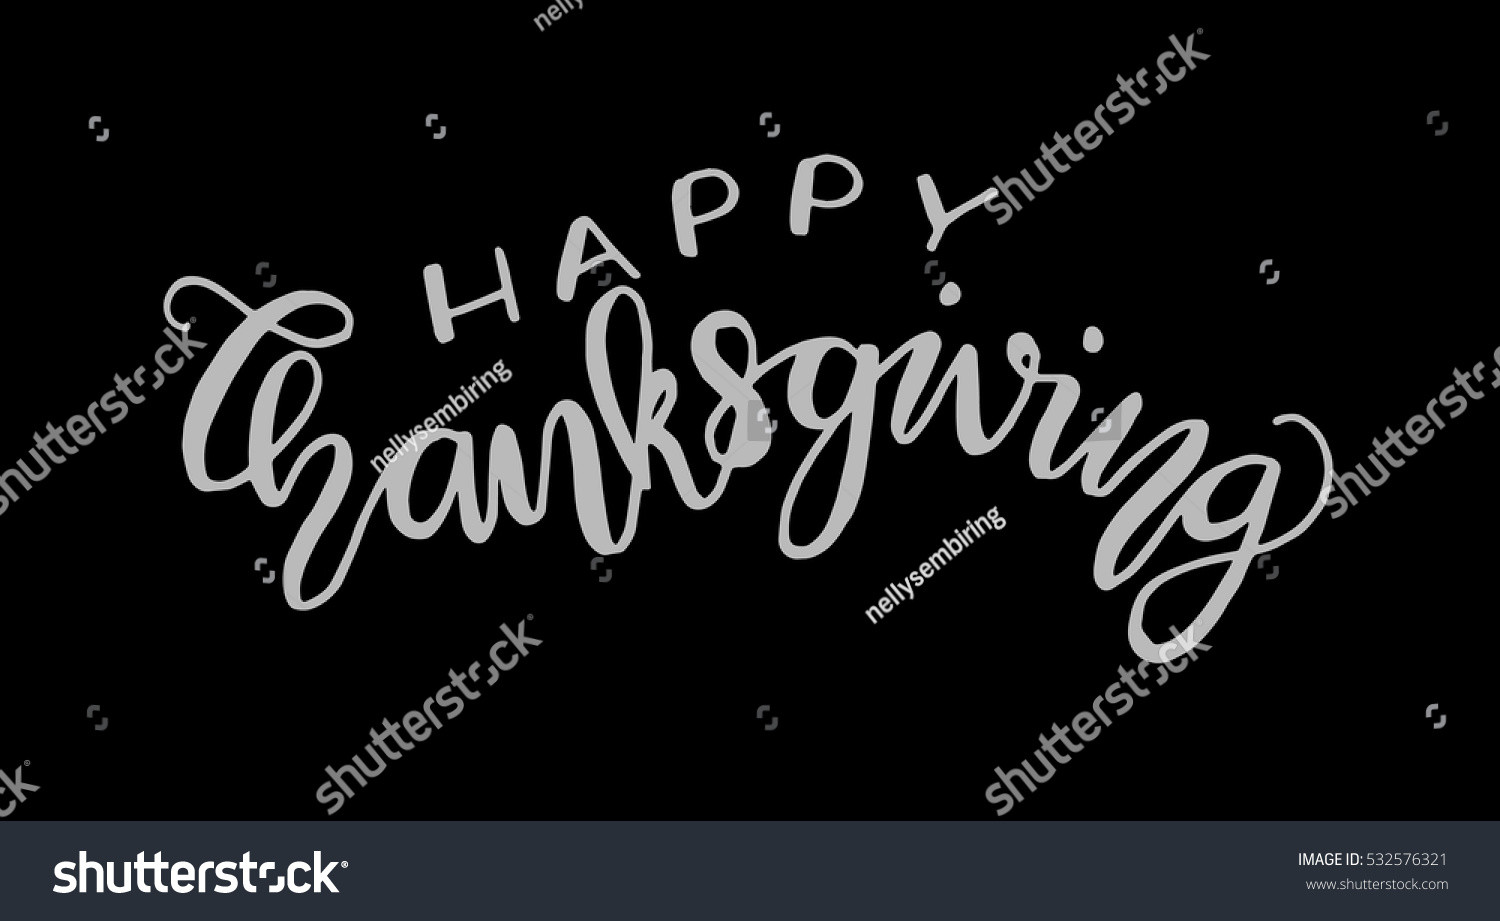 Thanksgiving Quotes Calligraphy
 Happy Thanksgiving Hand Lettered Quote Modern Stock Vector